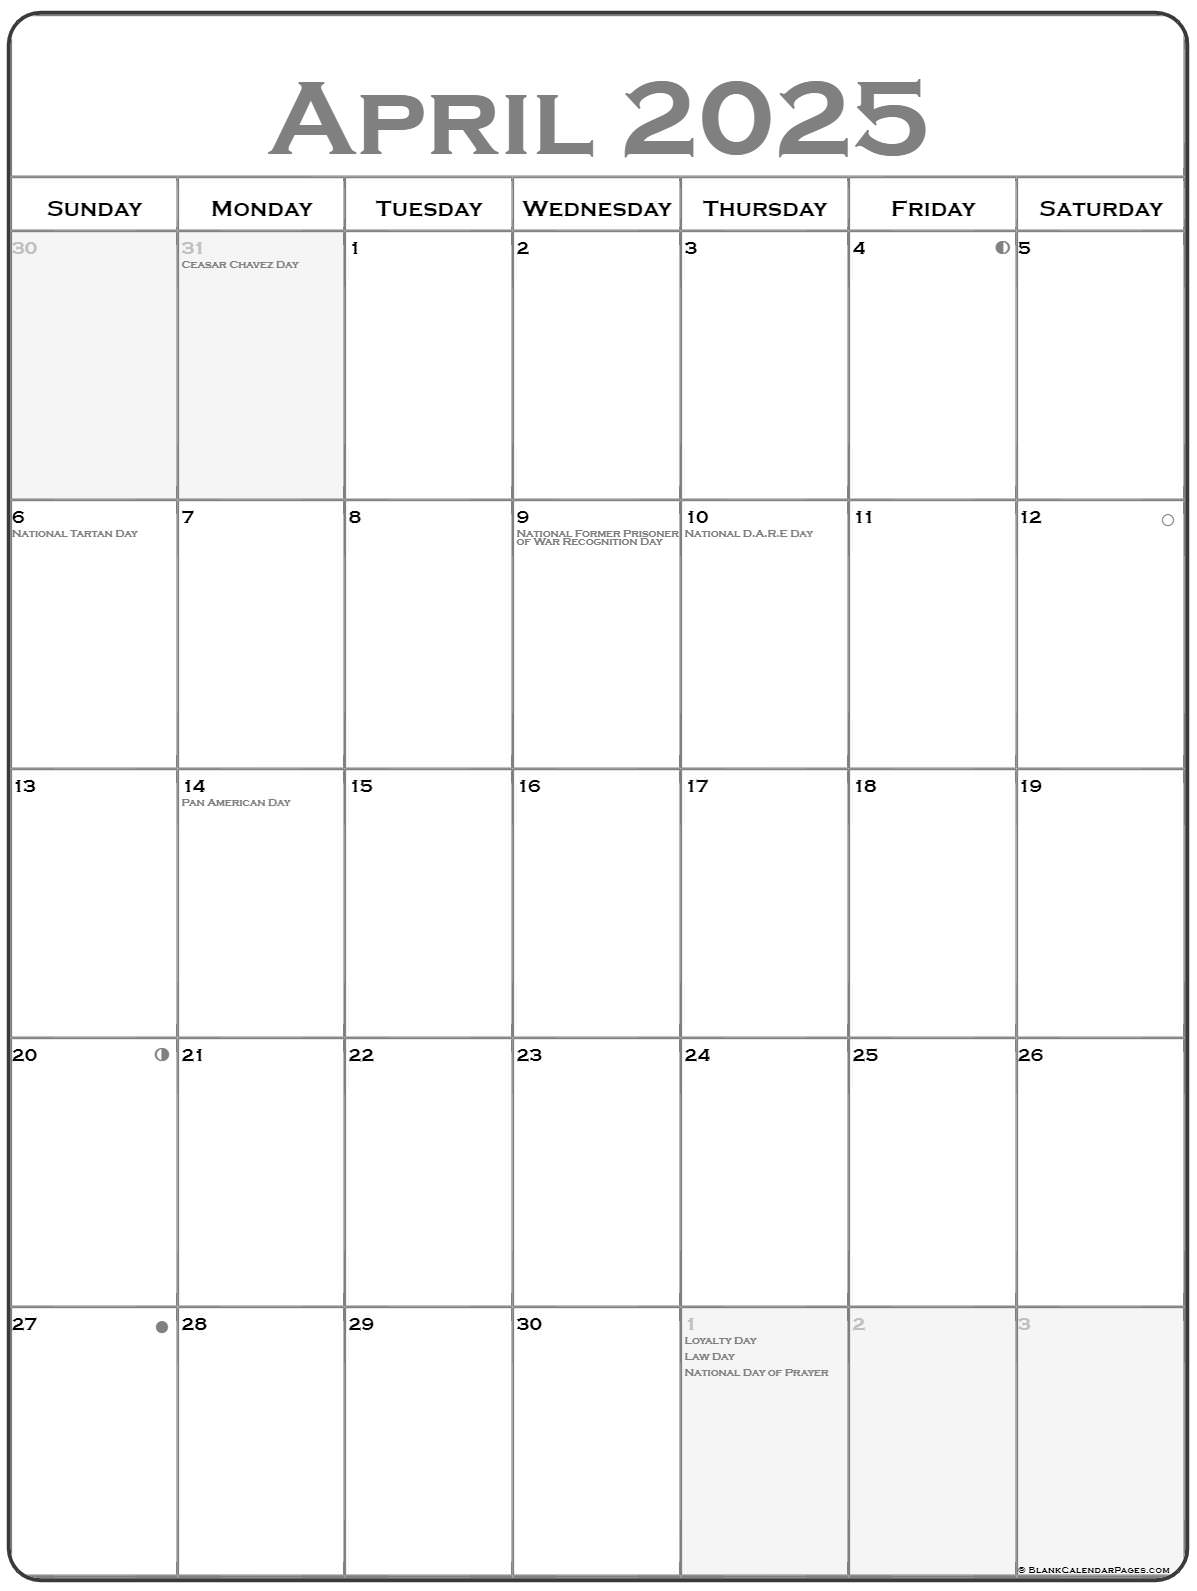 april-2025-calendar-with-united-states-holidays